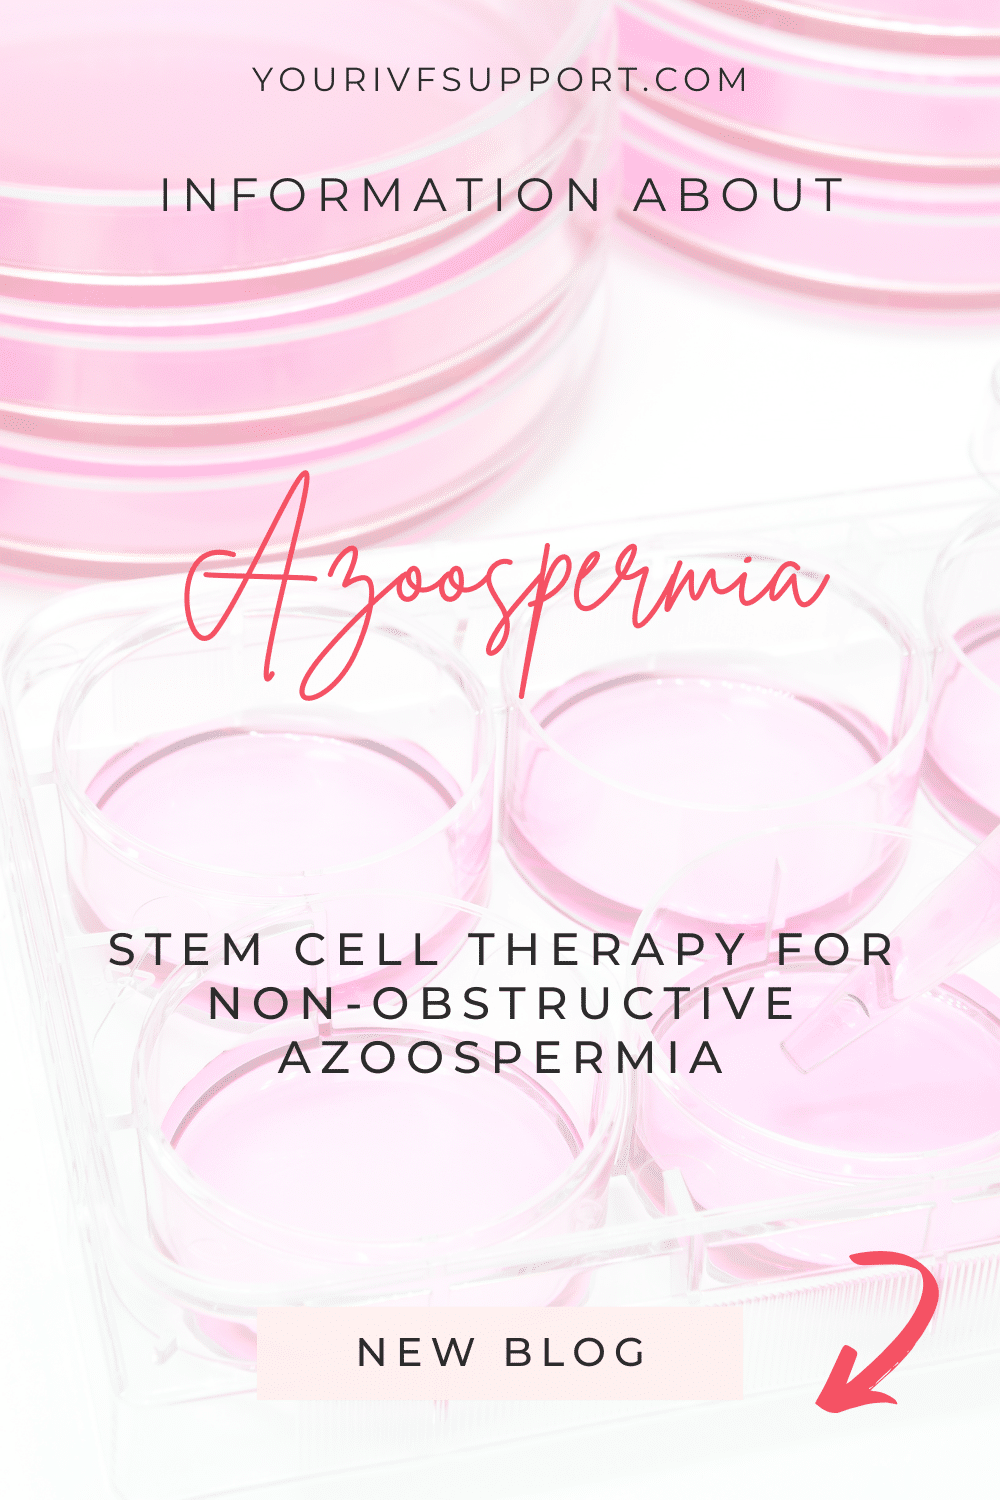 StemCell Therapy for non-obstructive Azoospermie